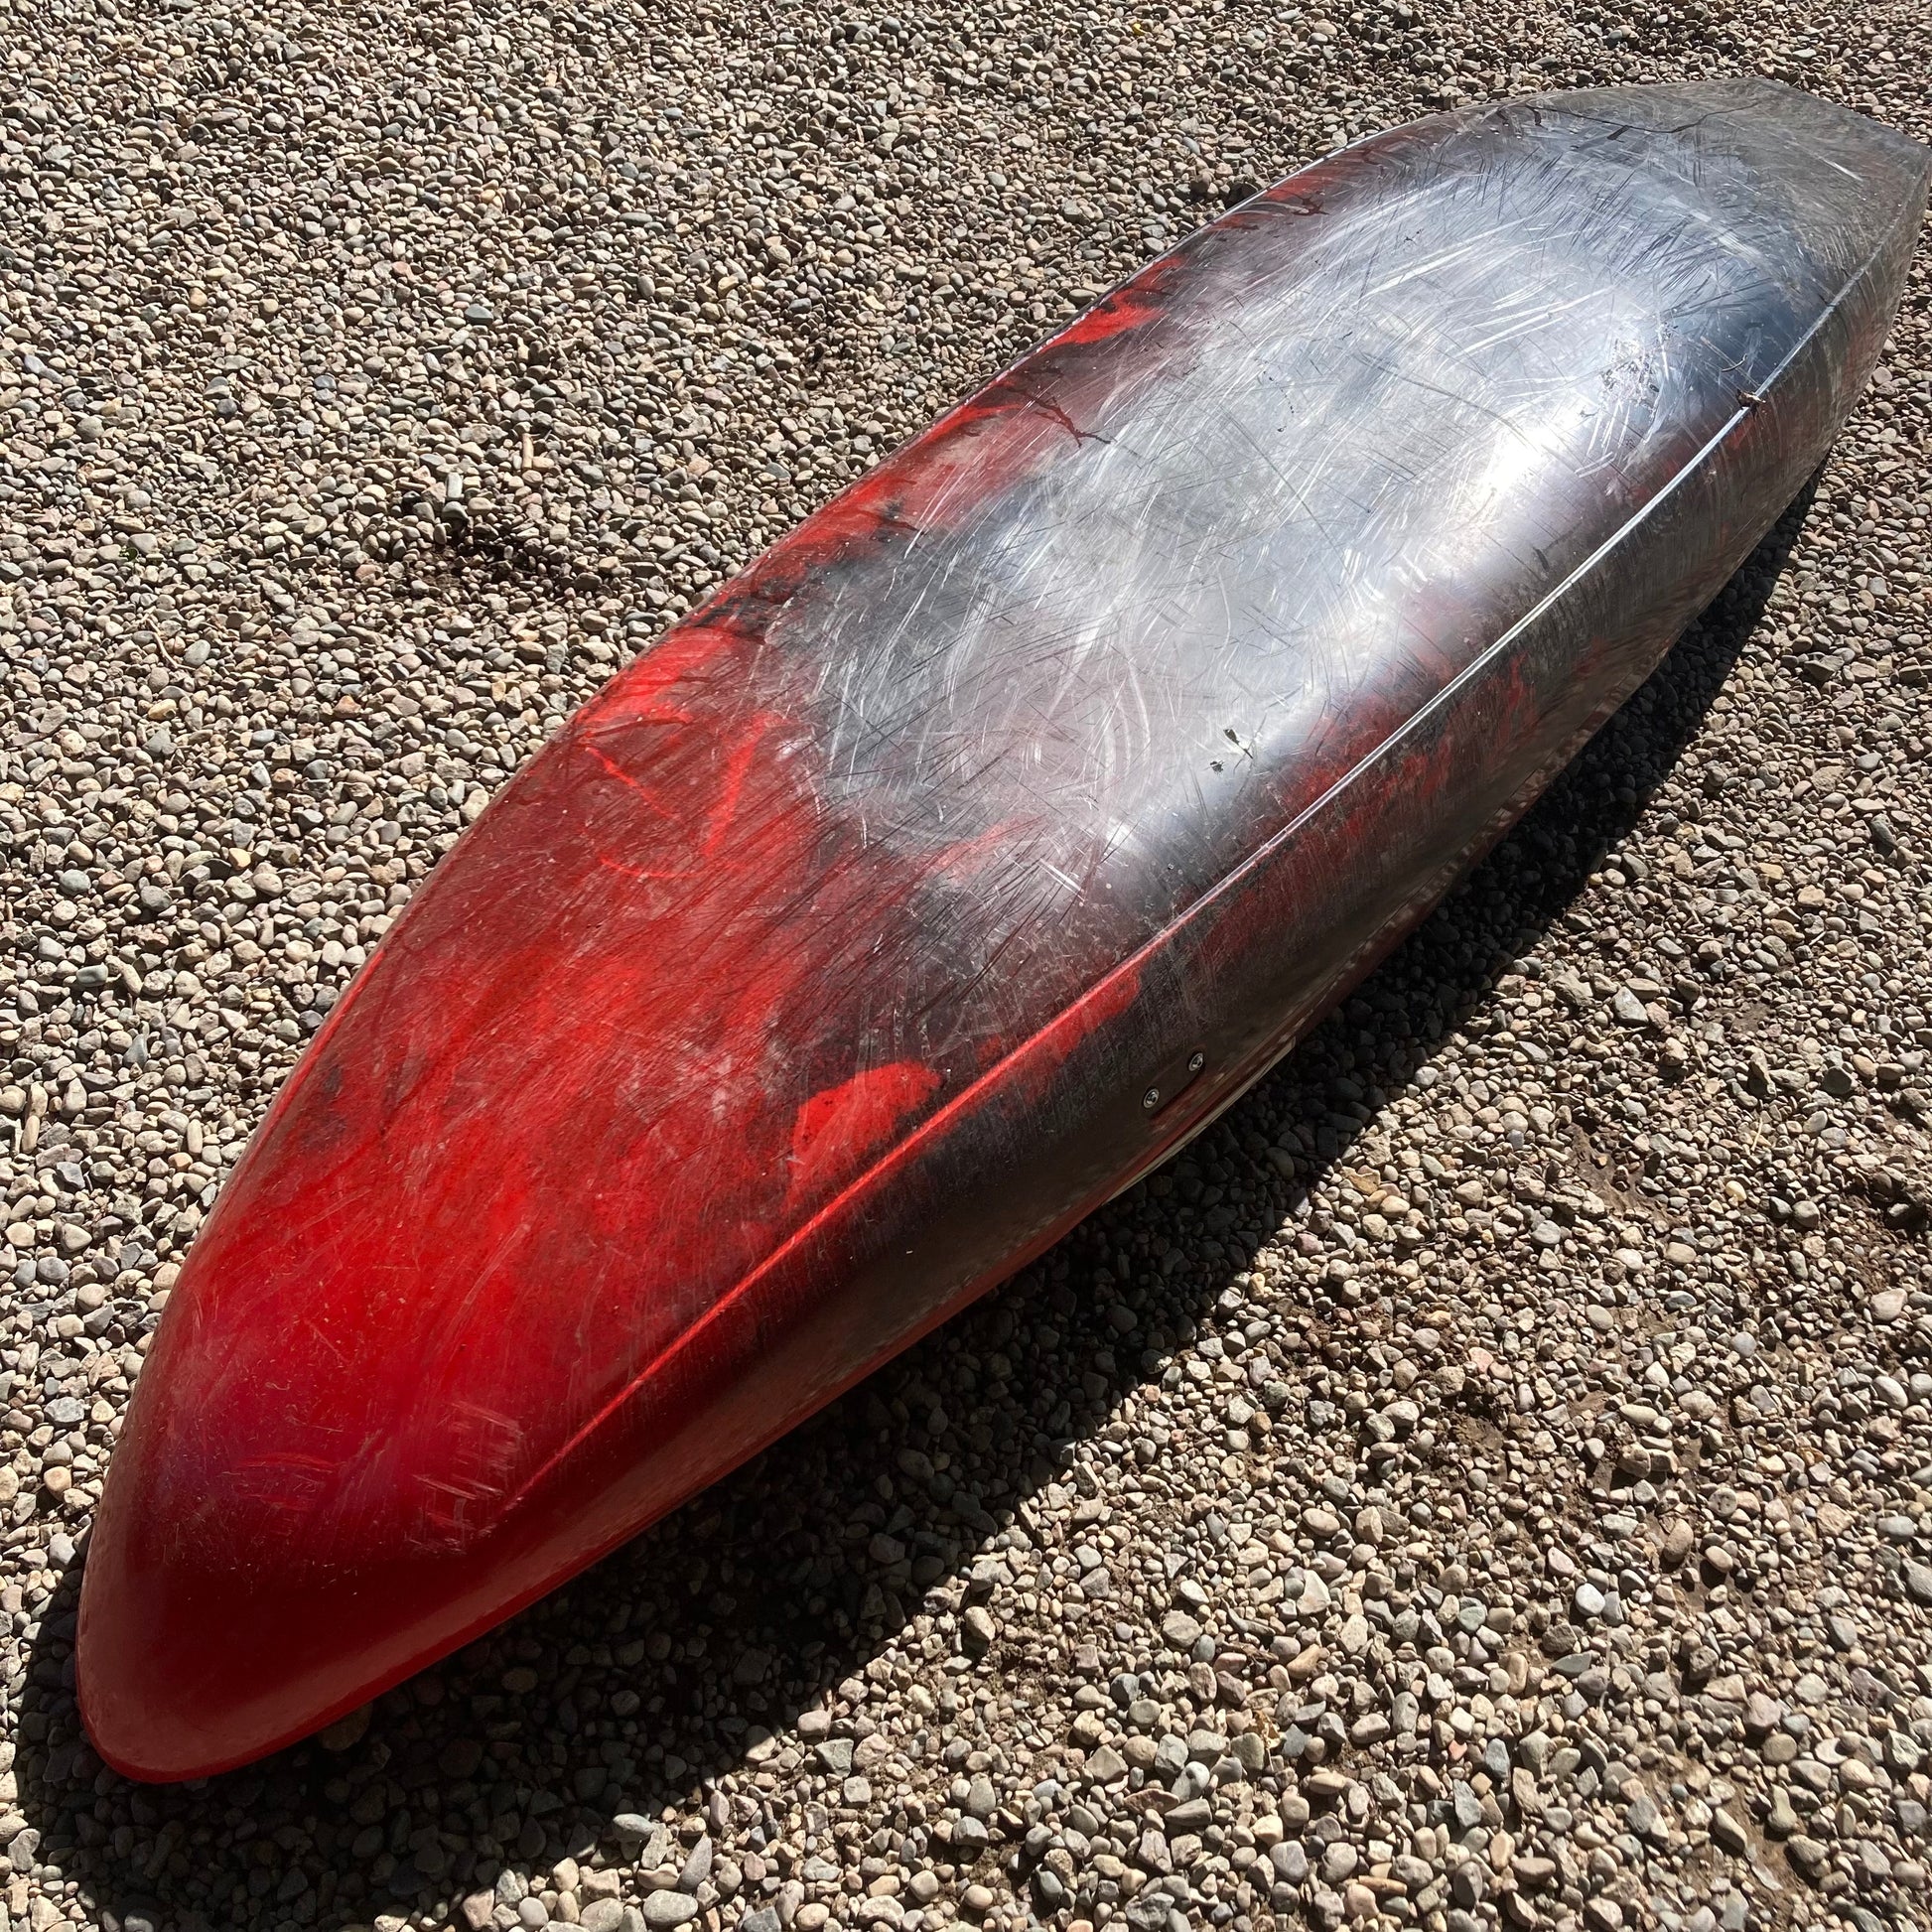 A red and silver Verus canoe laying on the ground.